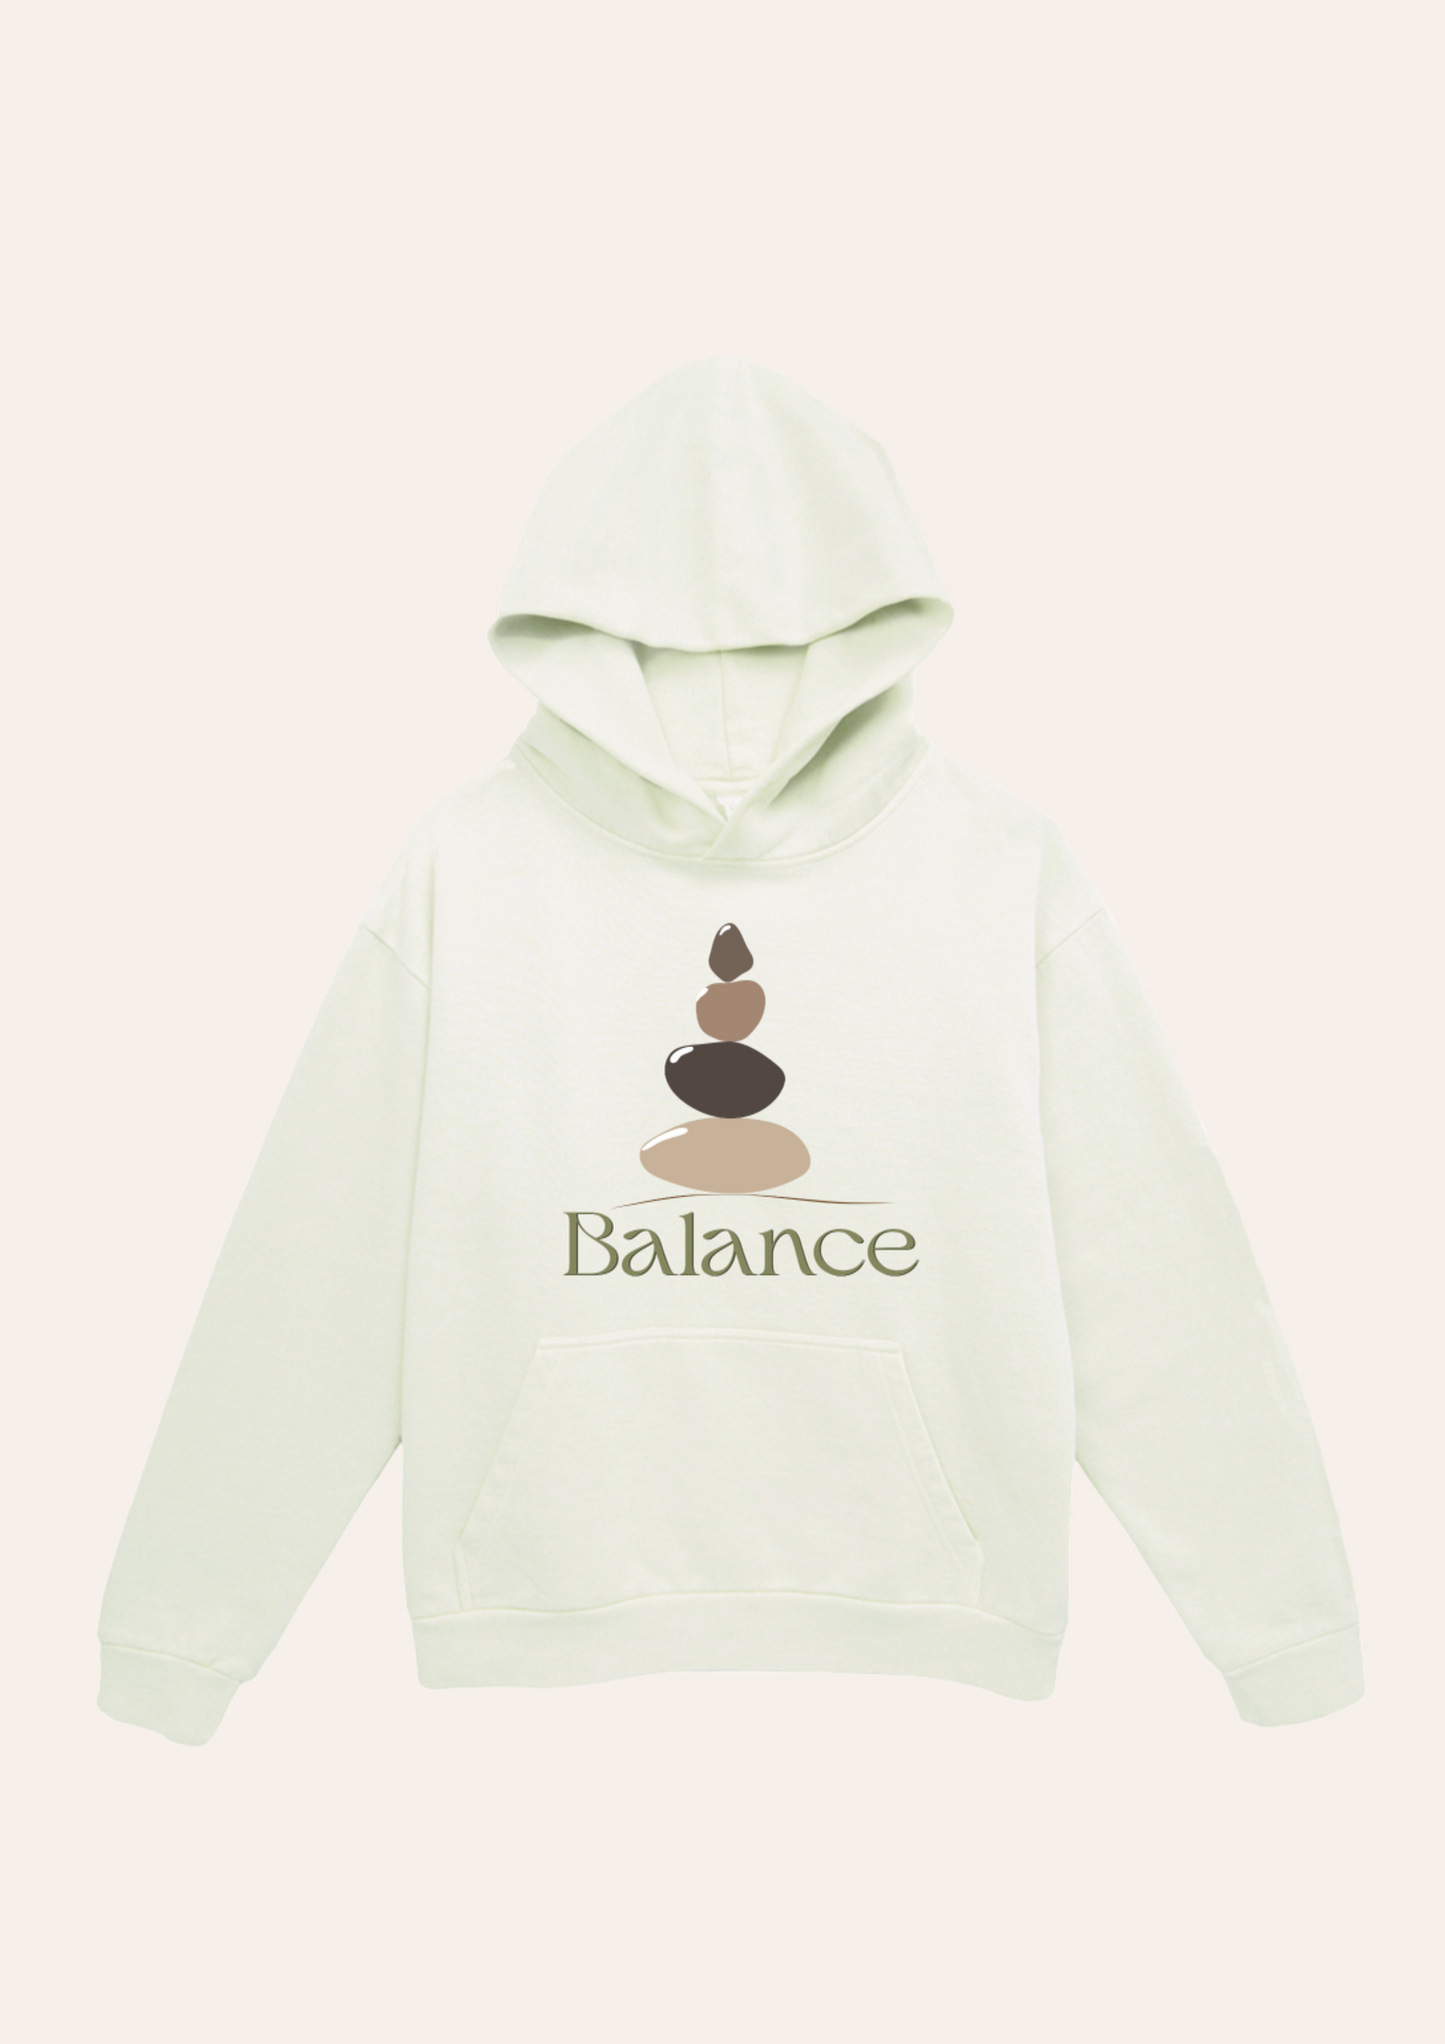 "Find Your Balance" Unisex Hoody